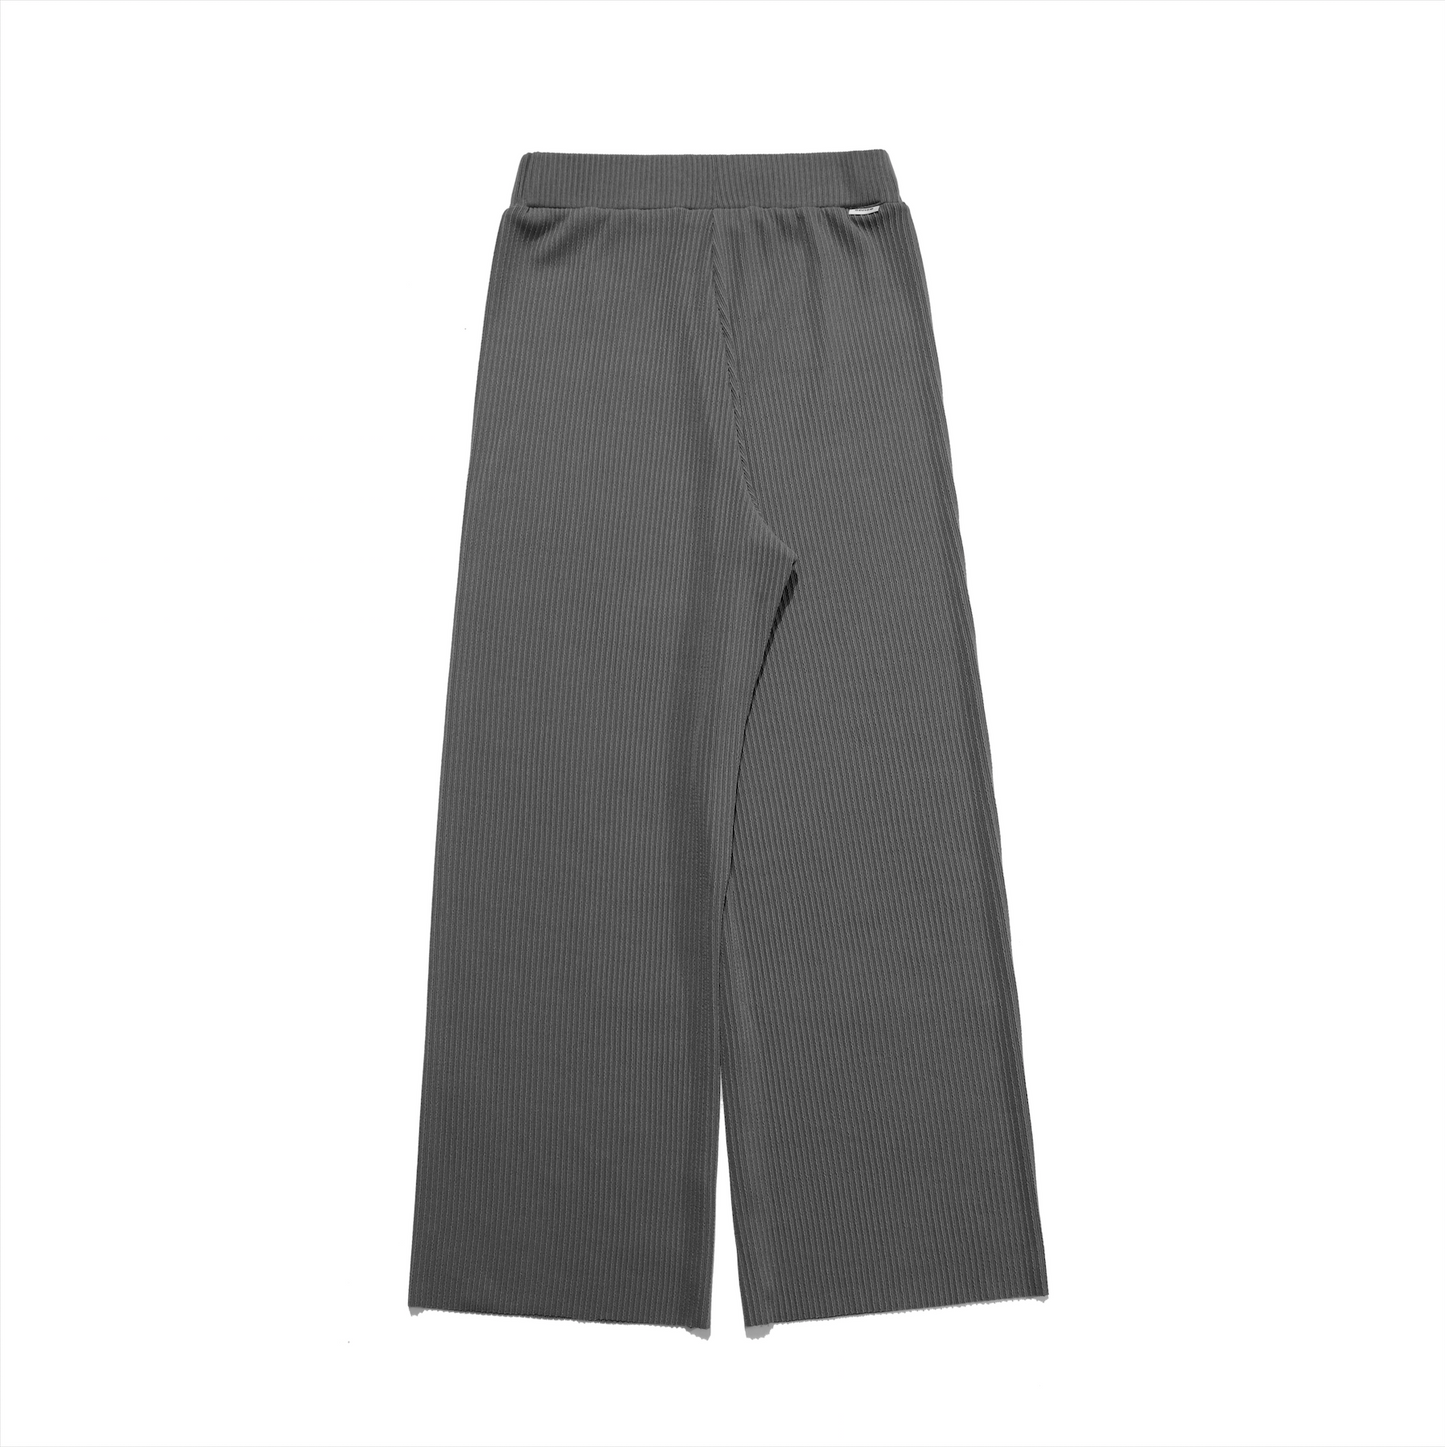 
                  
                    MS Wide Cut Casual Pants Grey【L21-41gy】
                  
                